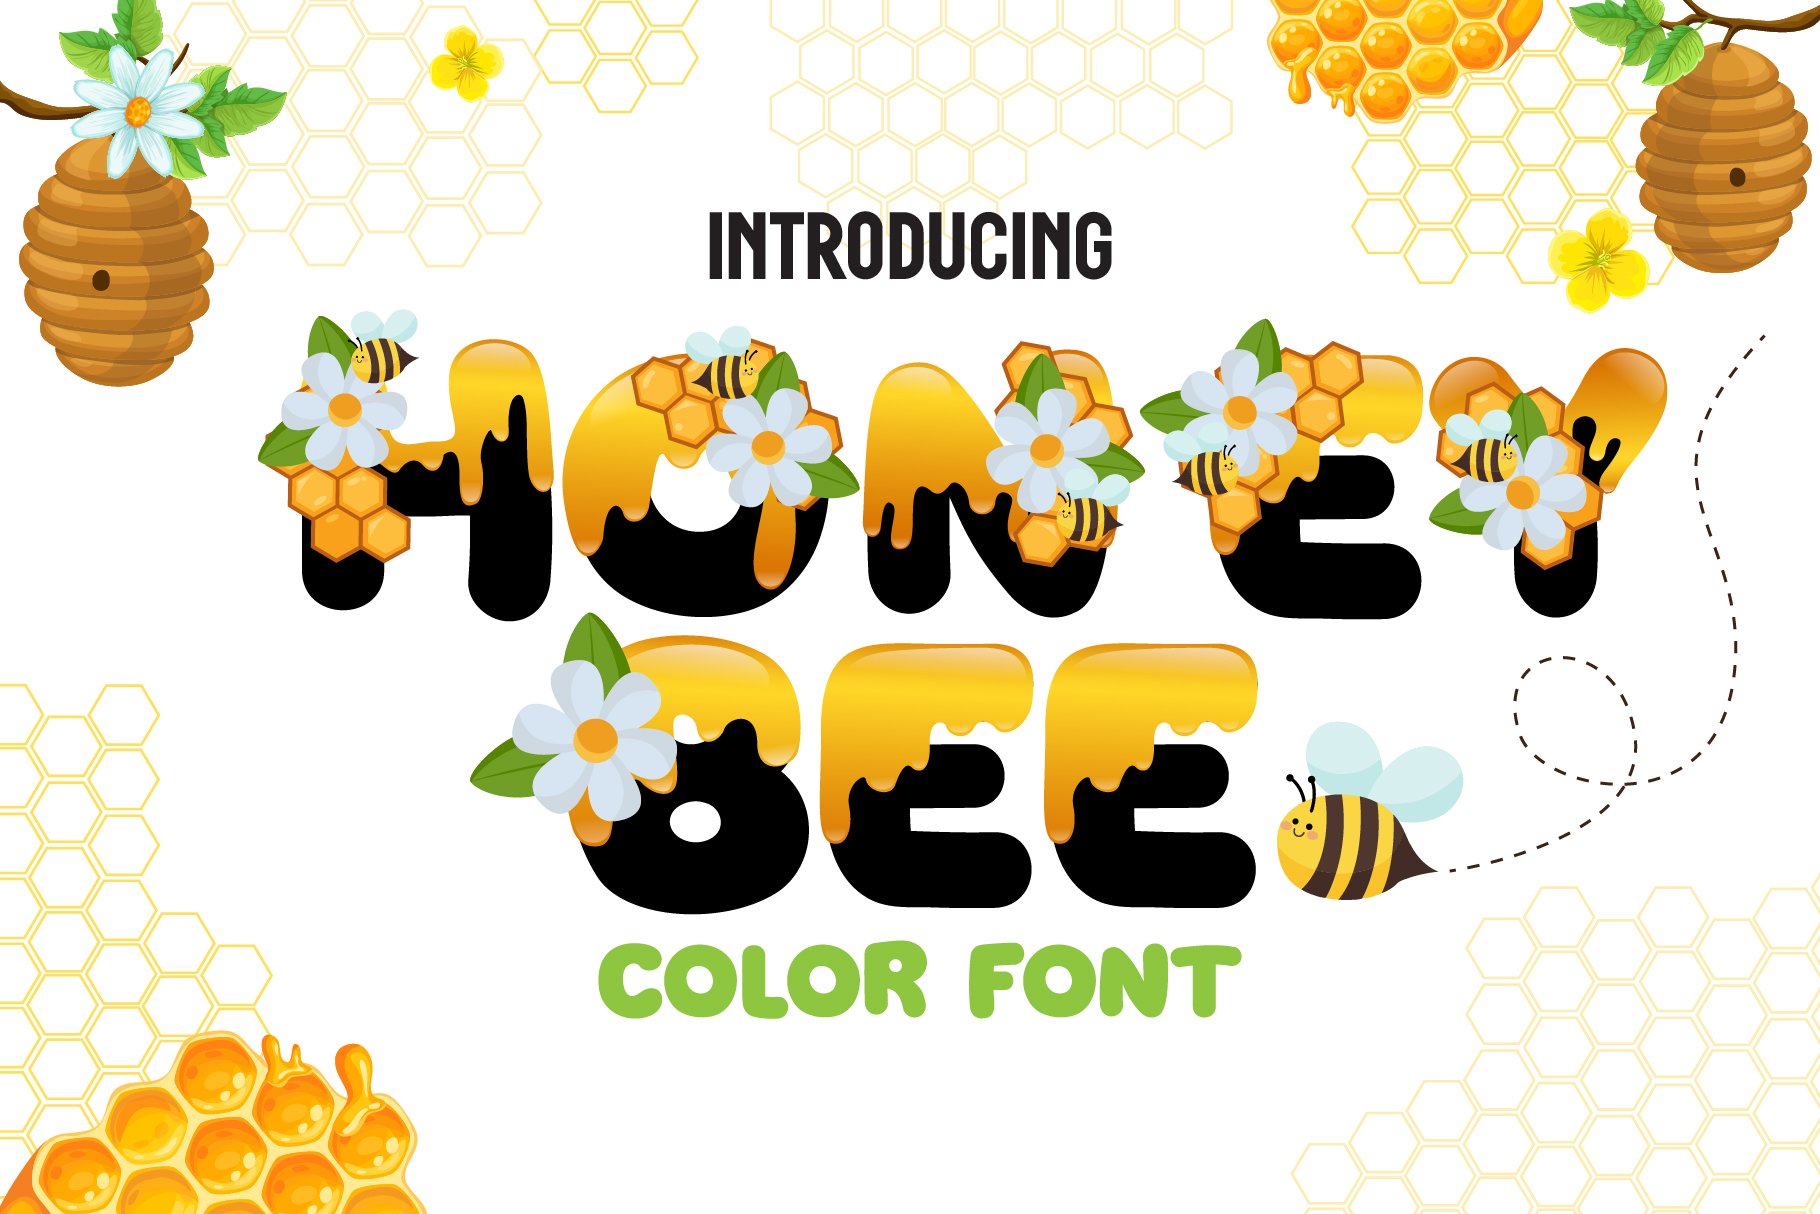 Honey Bee Color Fonts cover image.